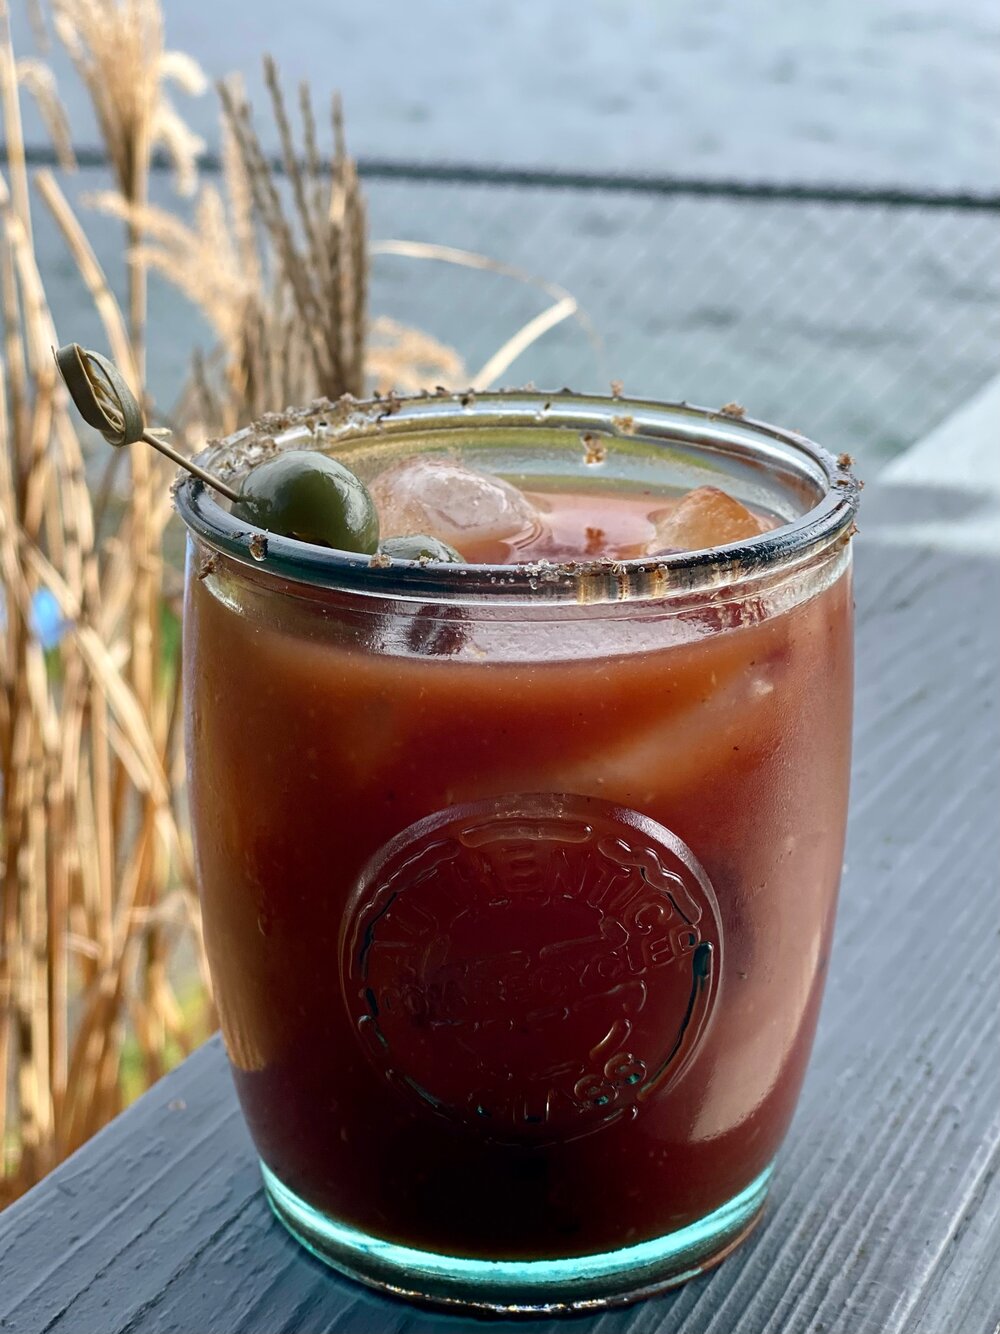 House made Bloody Mary cocktail mixture from vegetables in pitcher